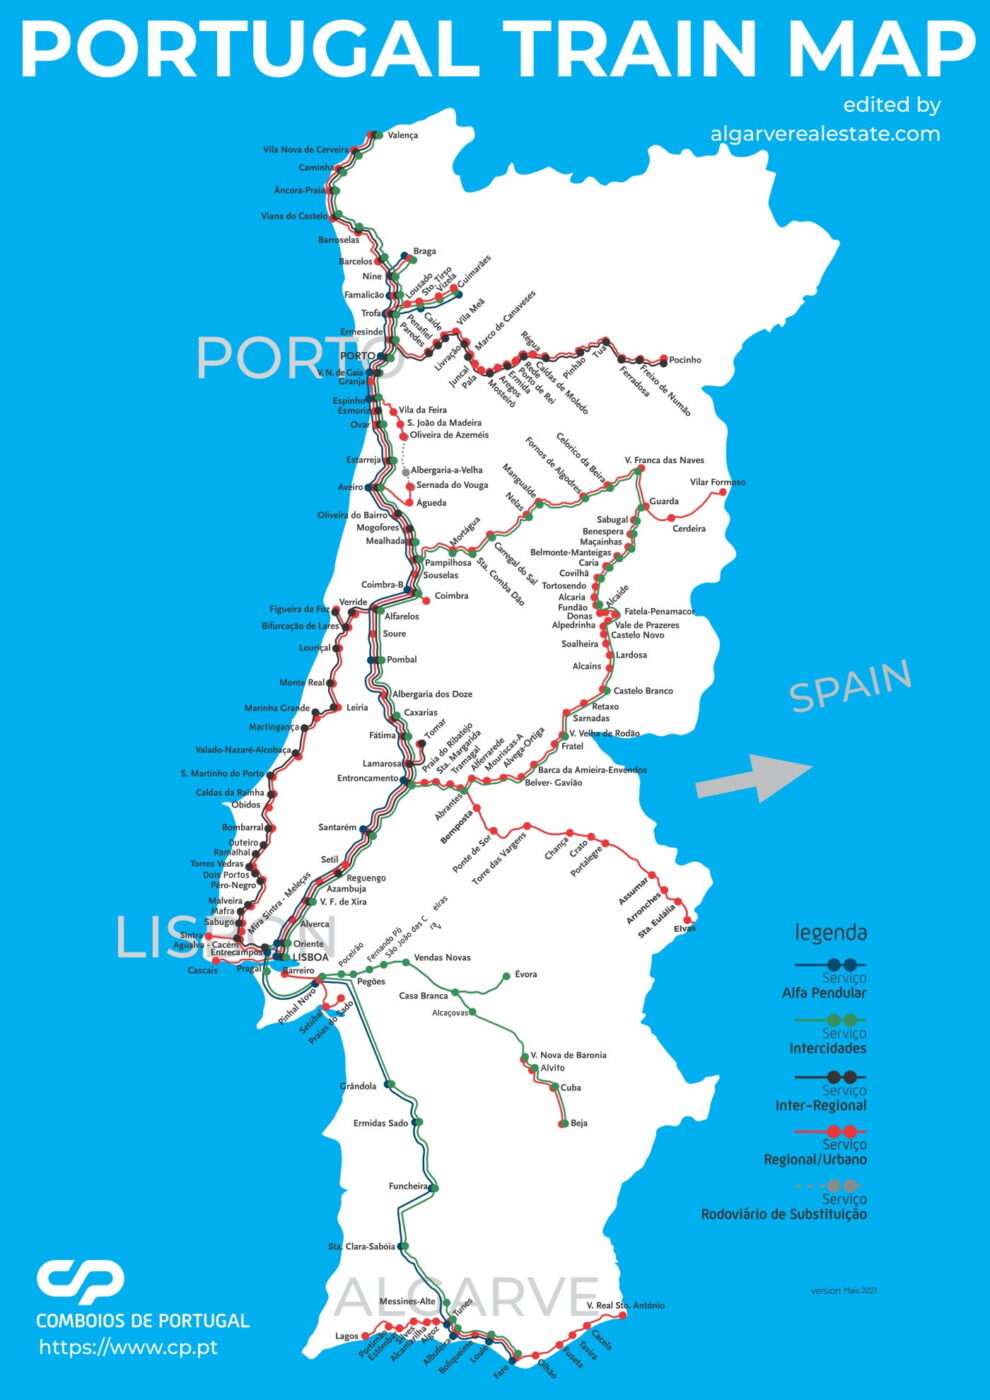 Map of Portugal showing the train lines, with different colors representing the various types of train services including fast trains, regional trains, and intercity trains